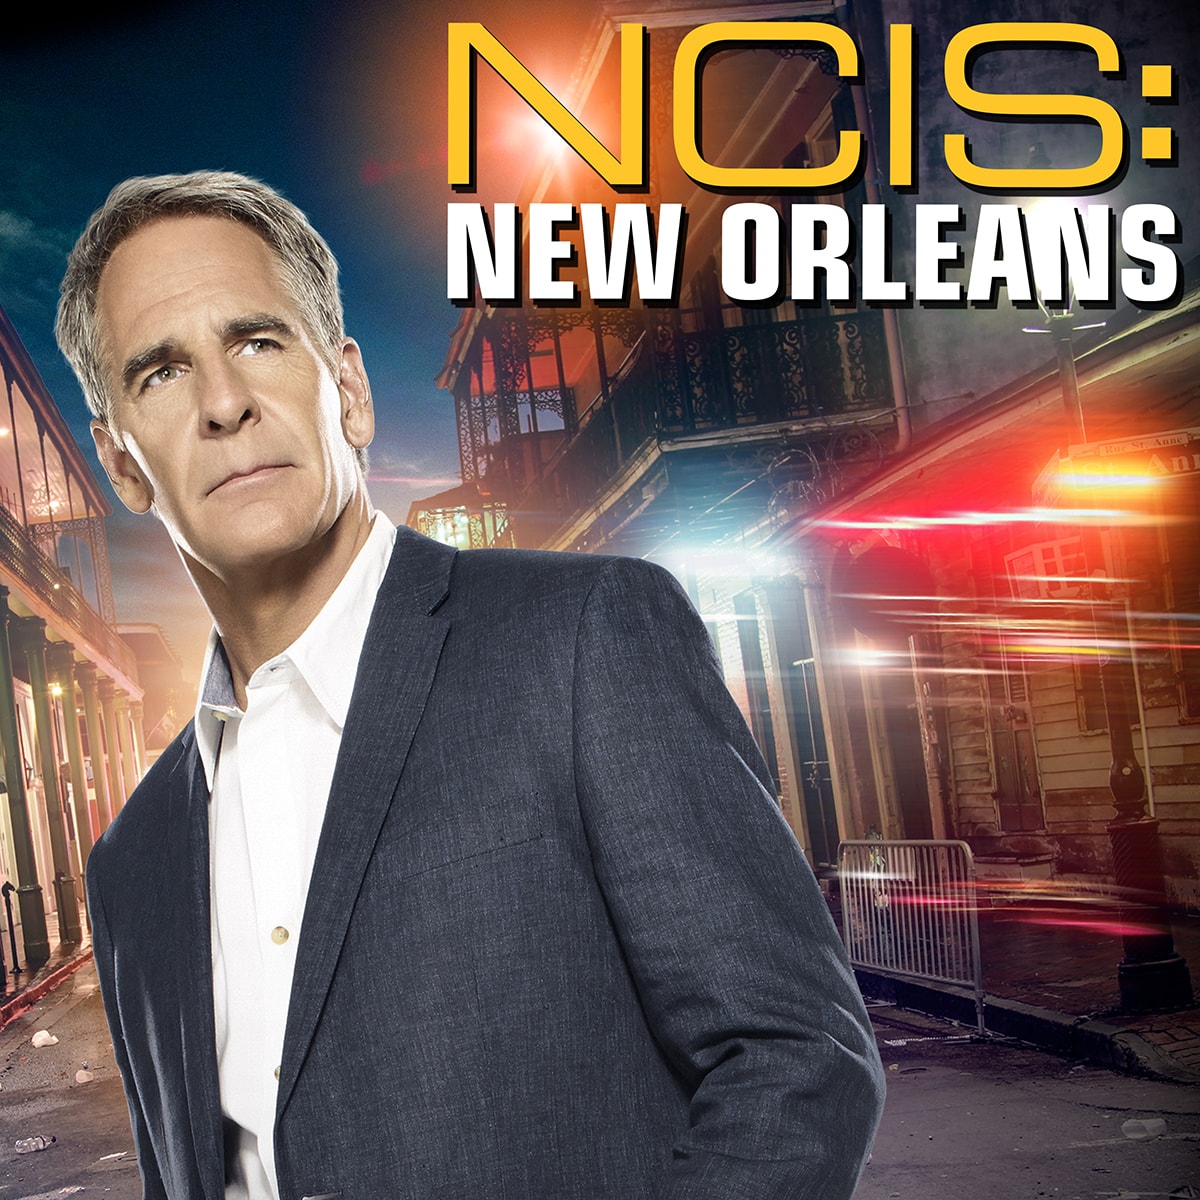 NCIS: New Orleans CBS Promos - Television Promos1200 x 1200